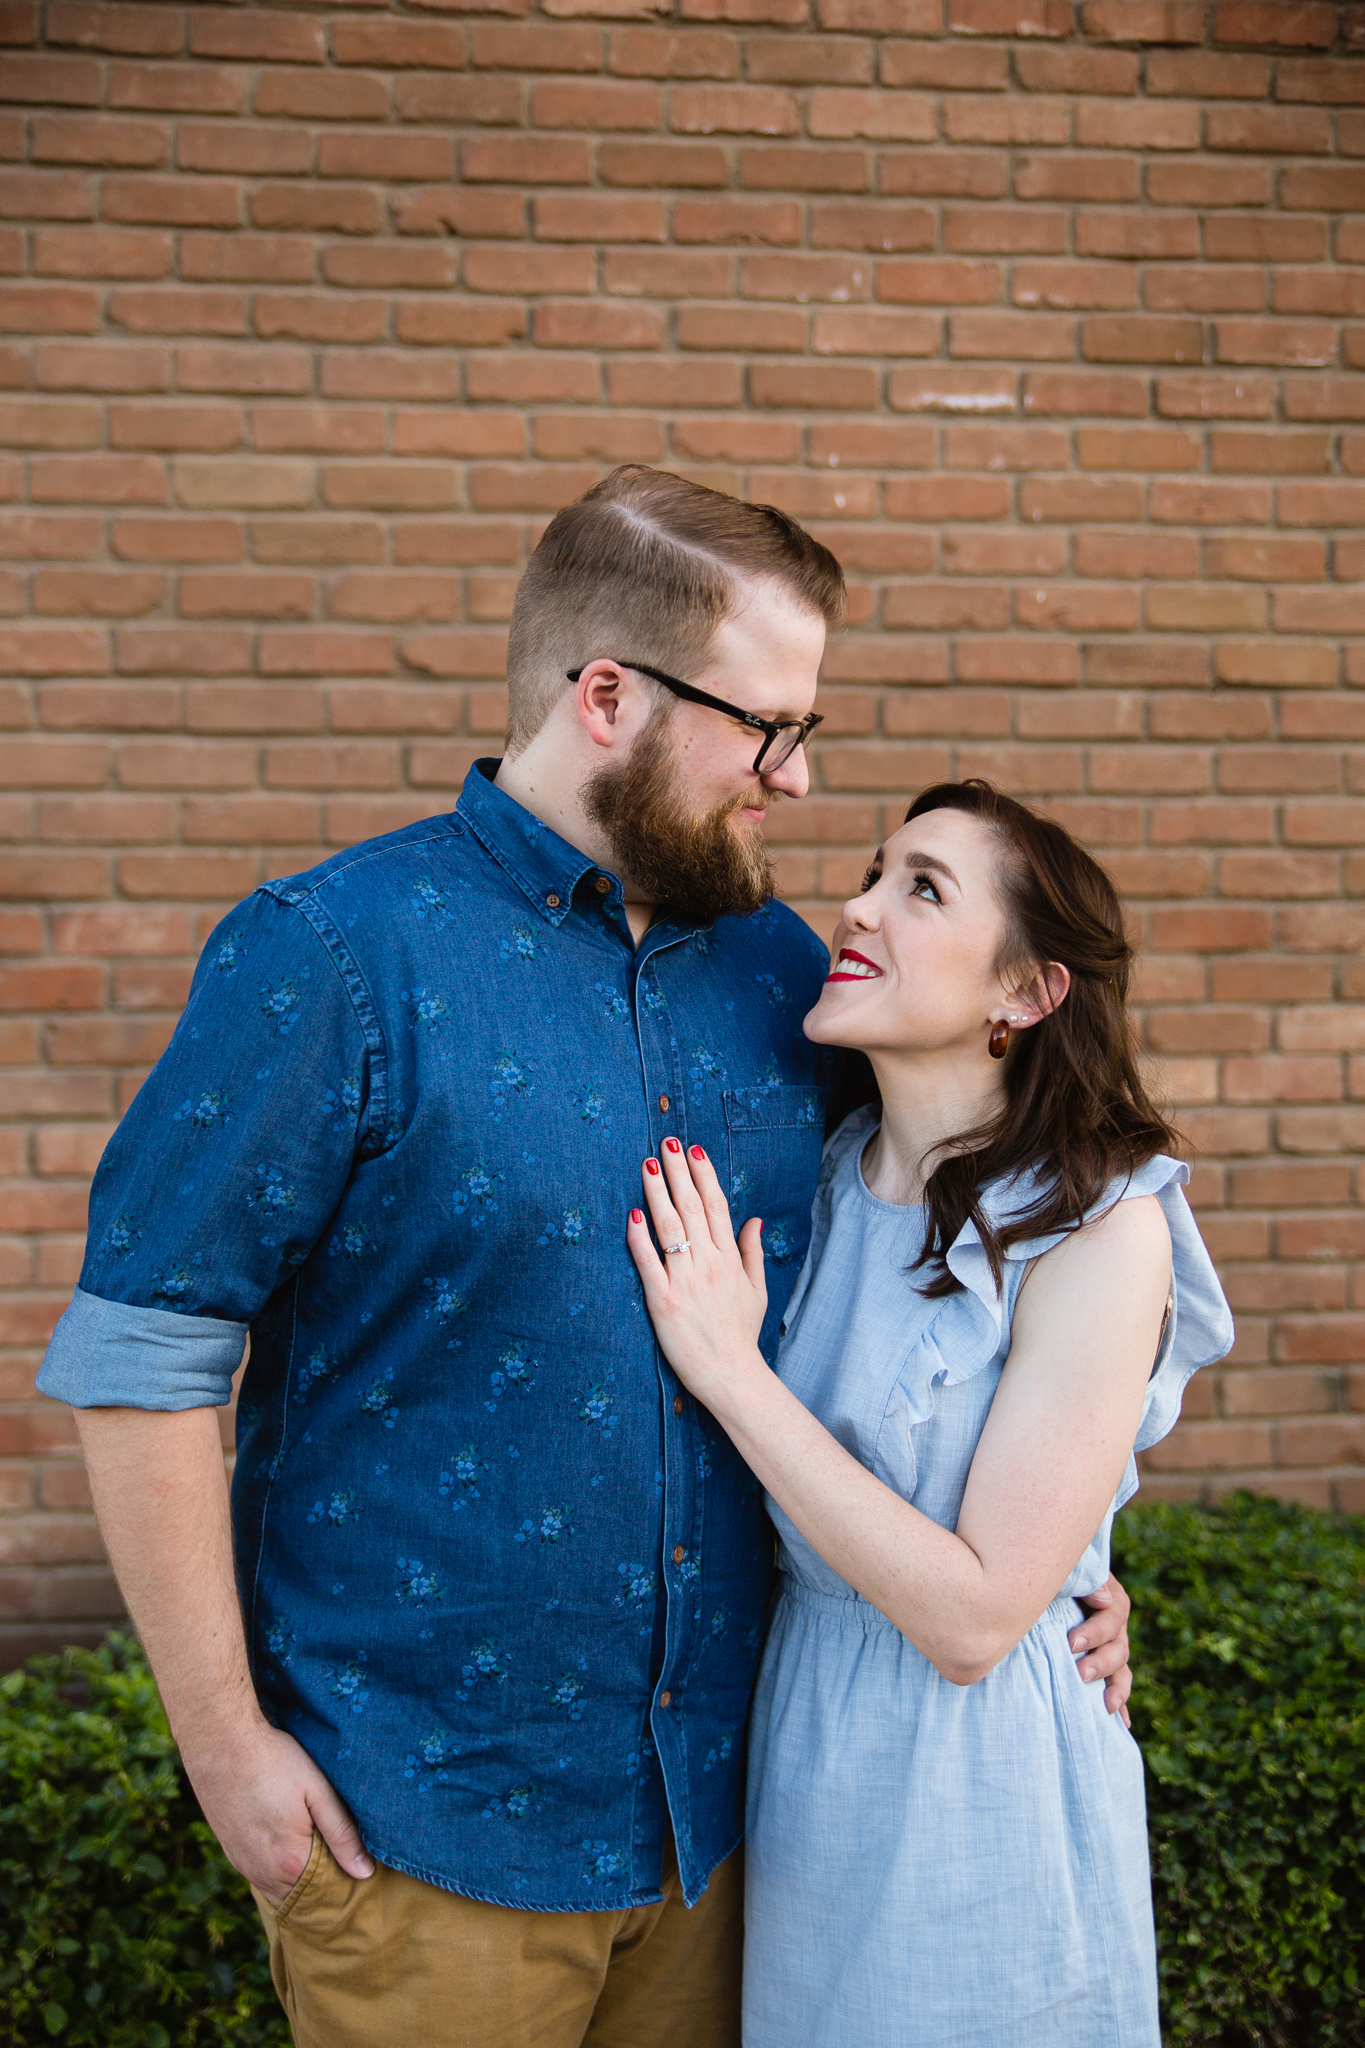 Couple looking at each other in front of red brick wall during their urban engagement session by Phoenix engagement photographer PMA Photography.